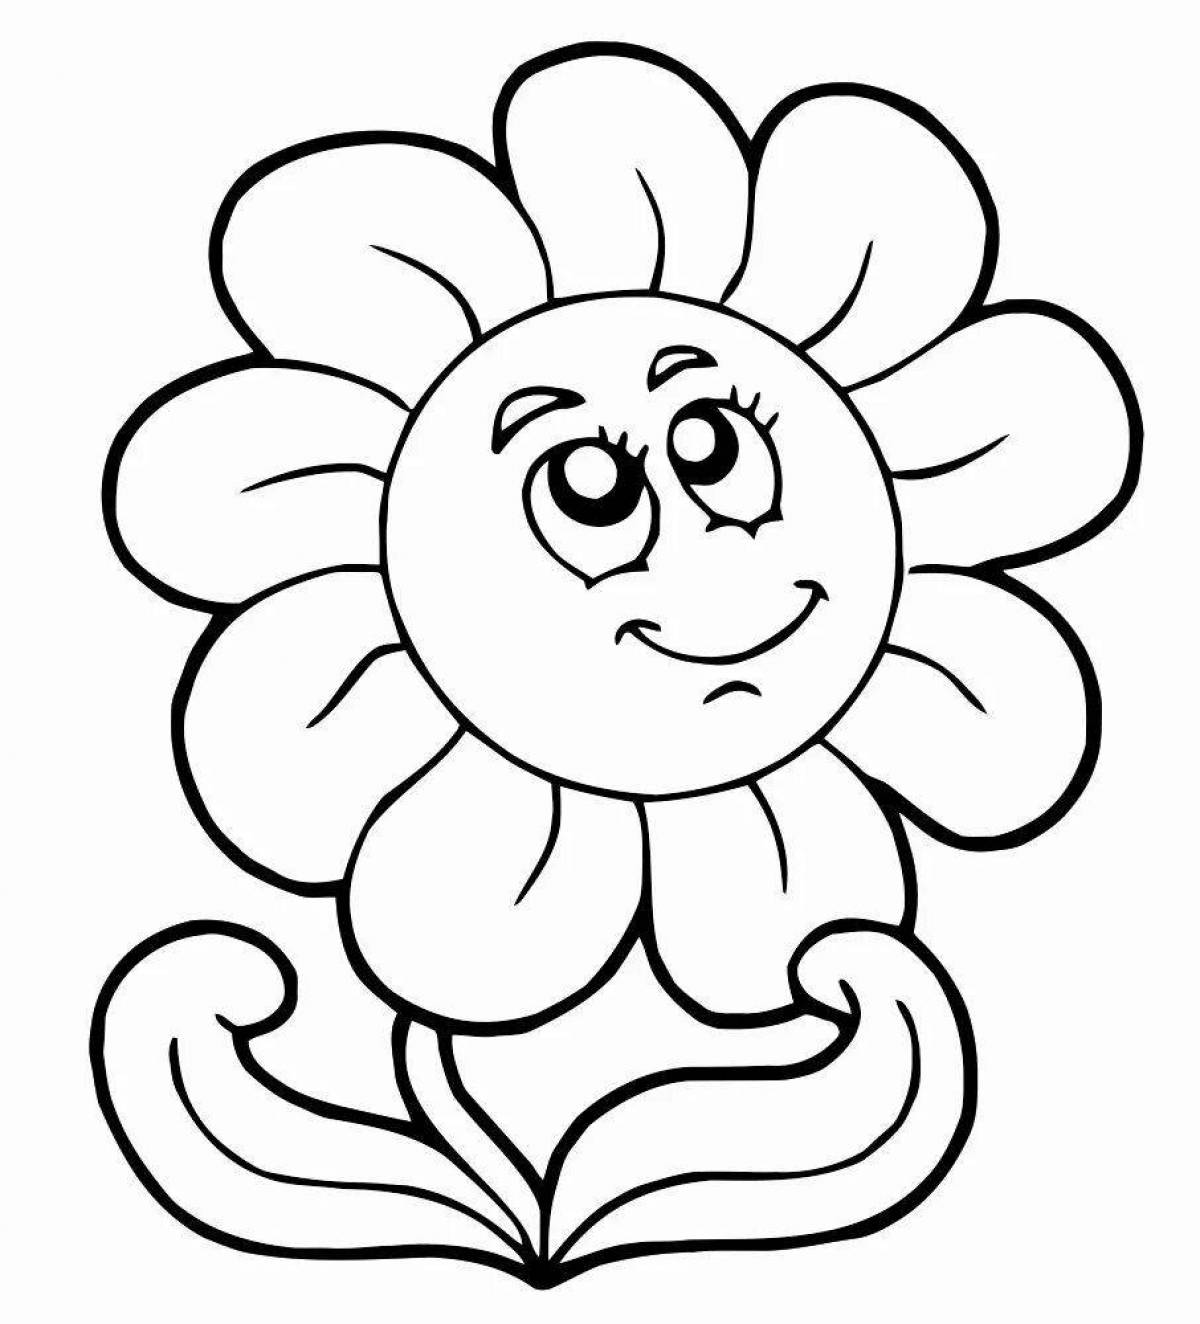 Radiant coloring flowers for children 3-4 years old